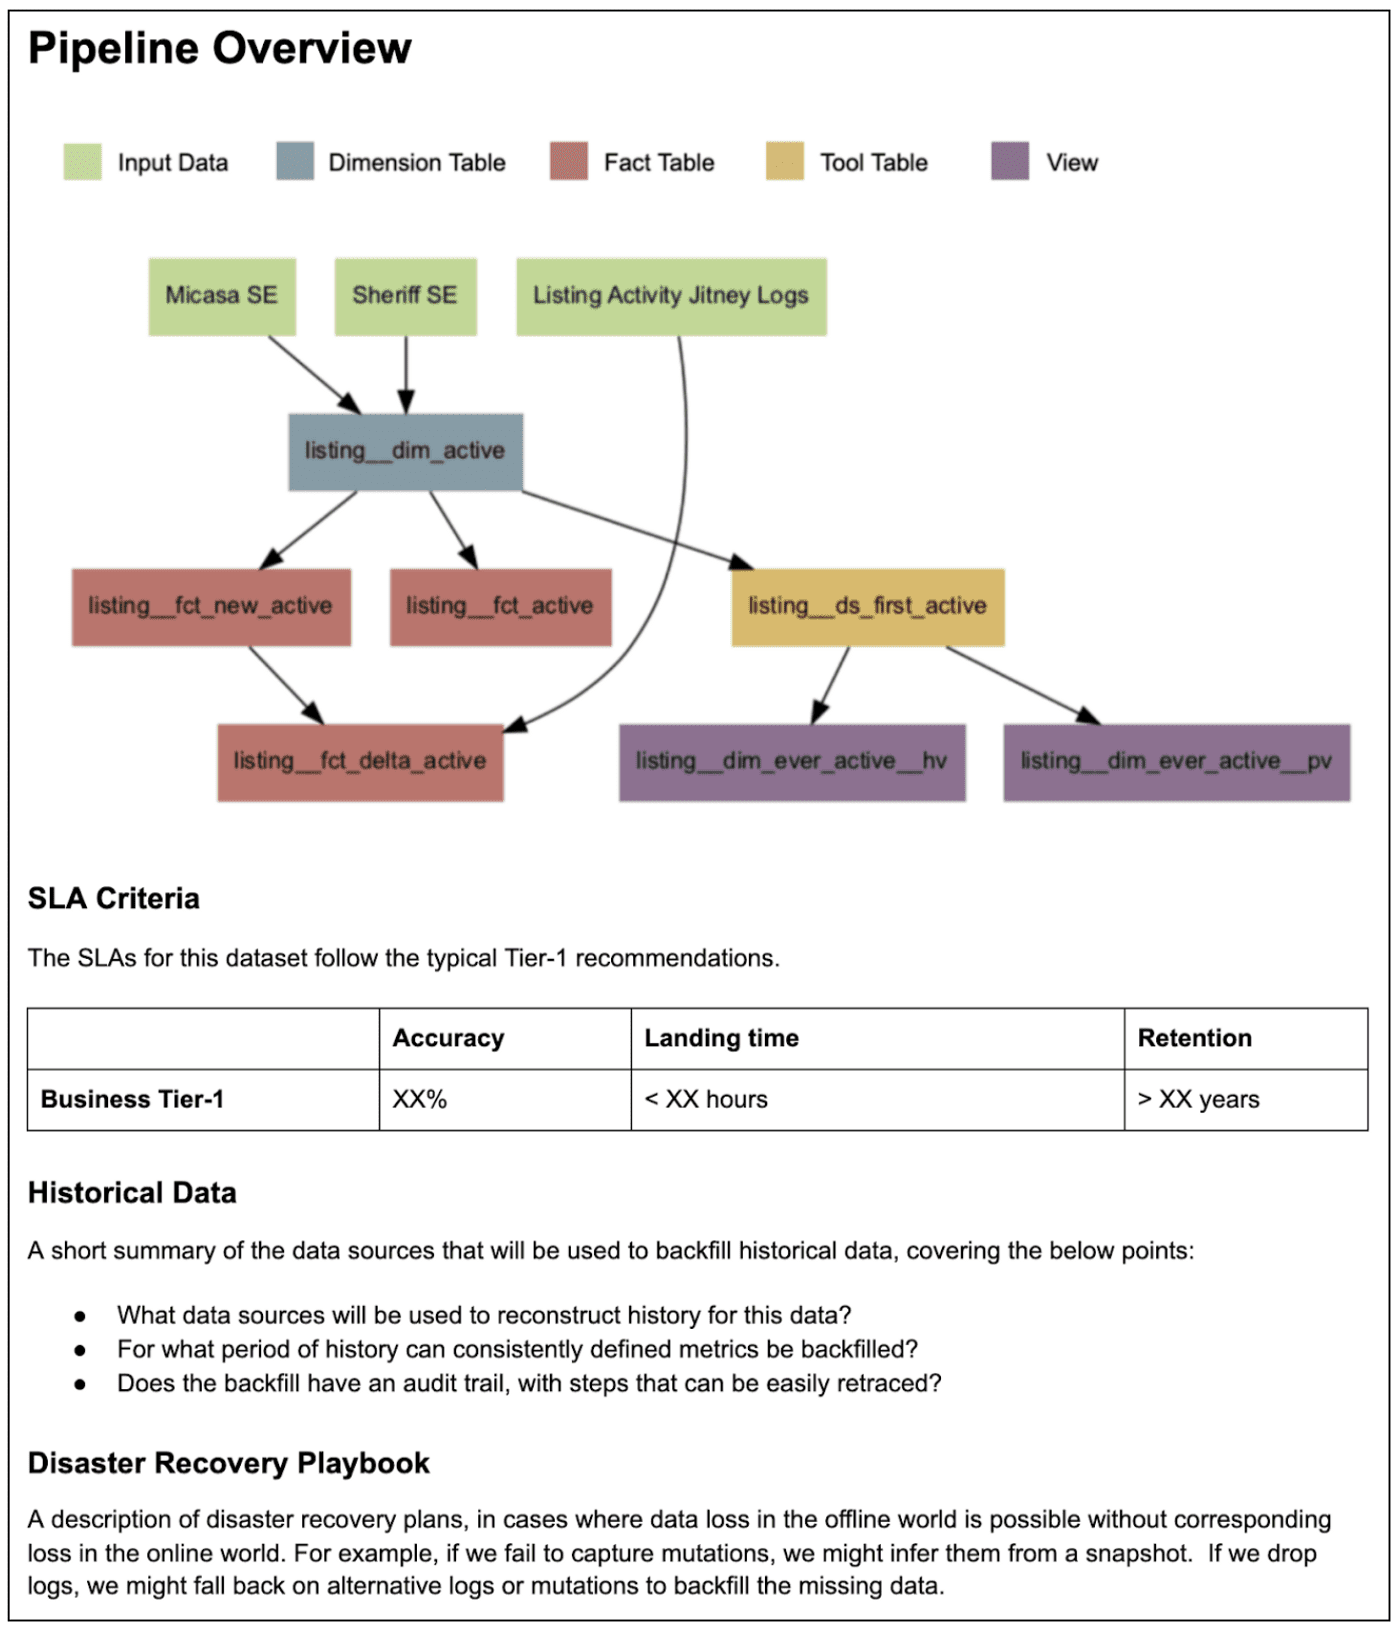 Fig 7: Example pipeline overview section from a Midas design spec.